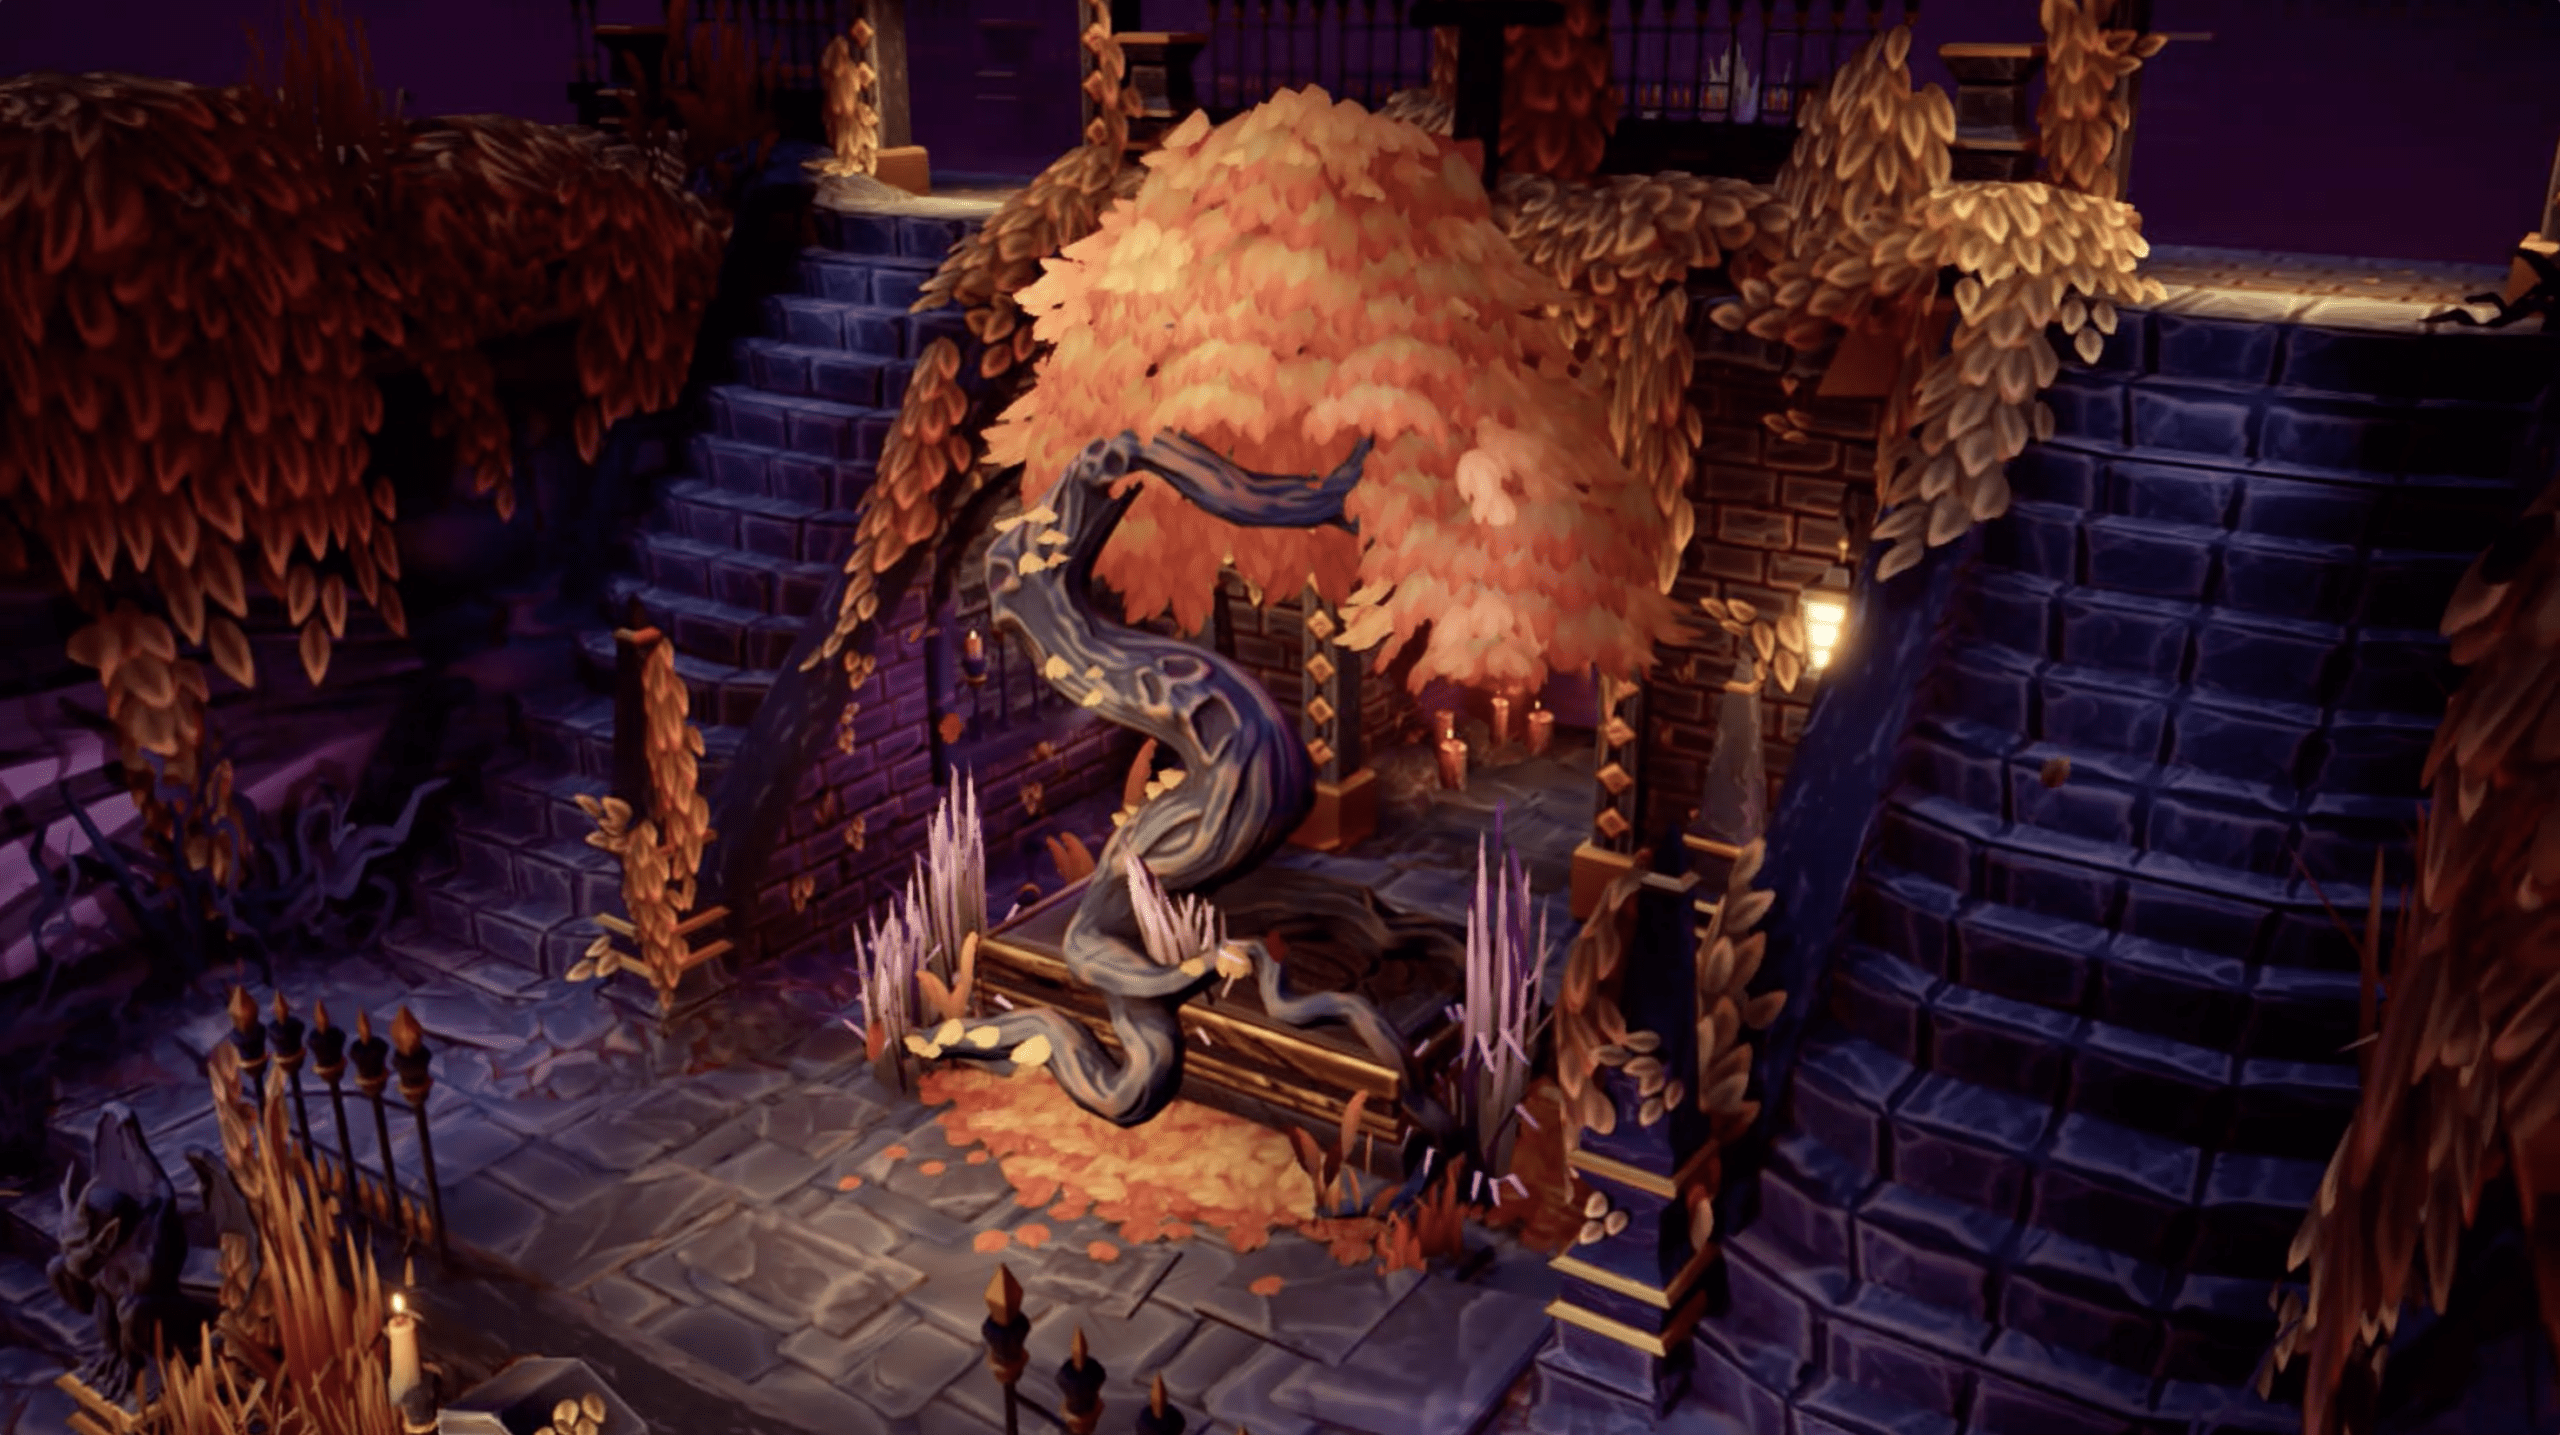 3D model of a game environment depicting a tall tree with orange leaves and a twisted and knobby trunk. To the left and right of the tree are stone staircases that leadup to two iron gates and lamps that are off screen. At the base of the staircases is a cobblestone walkway littered with fallen leaves. A soft yellow spotlight is shining on the tree.